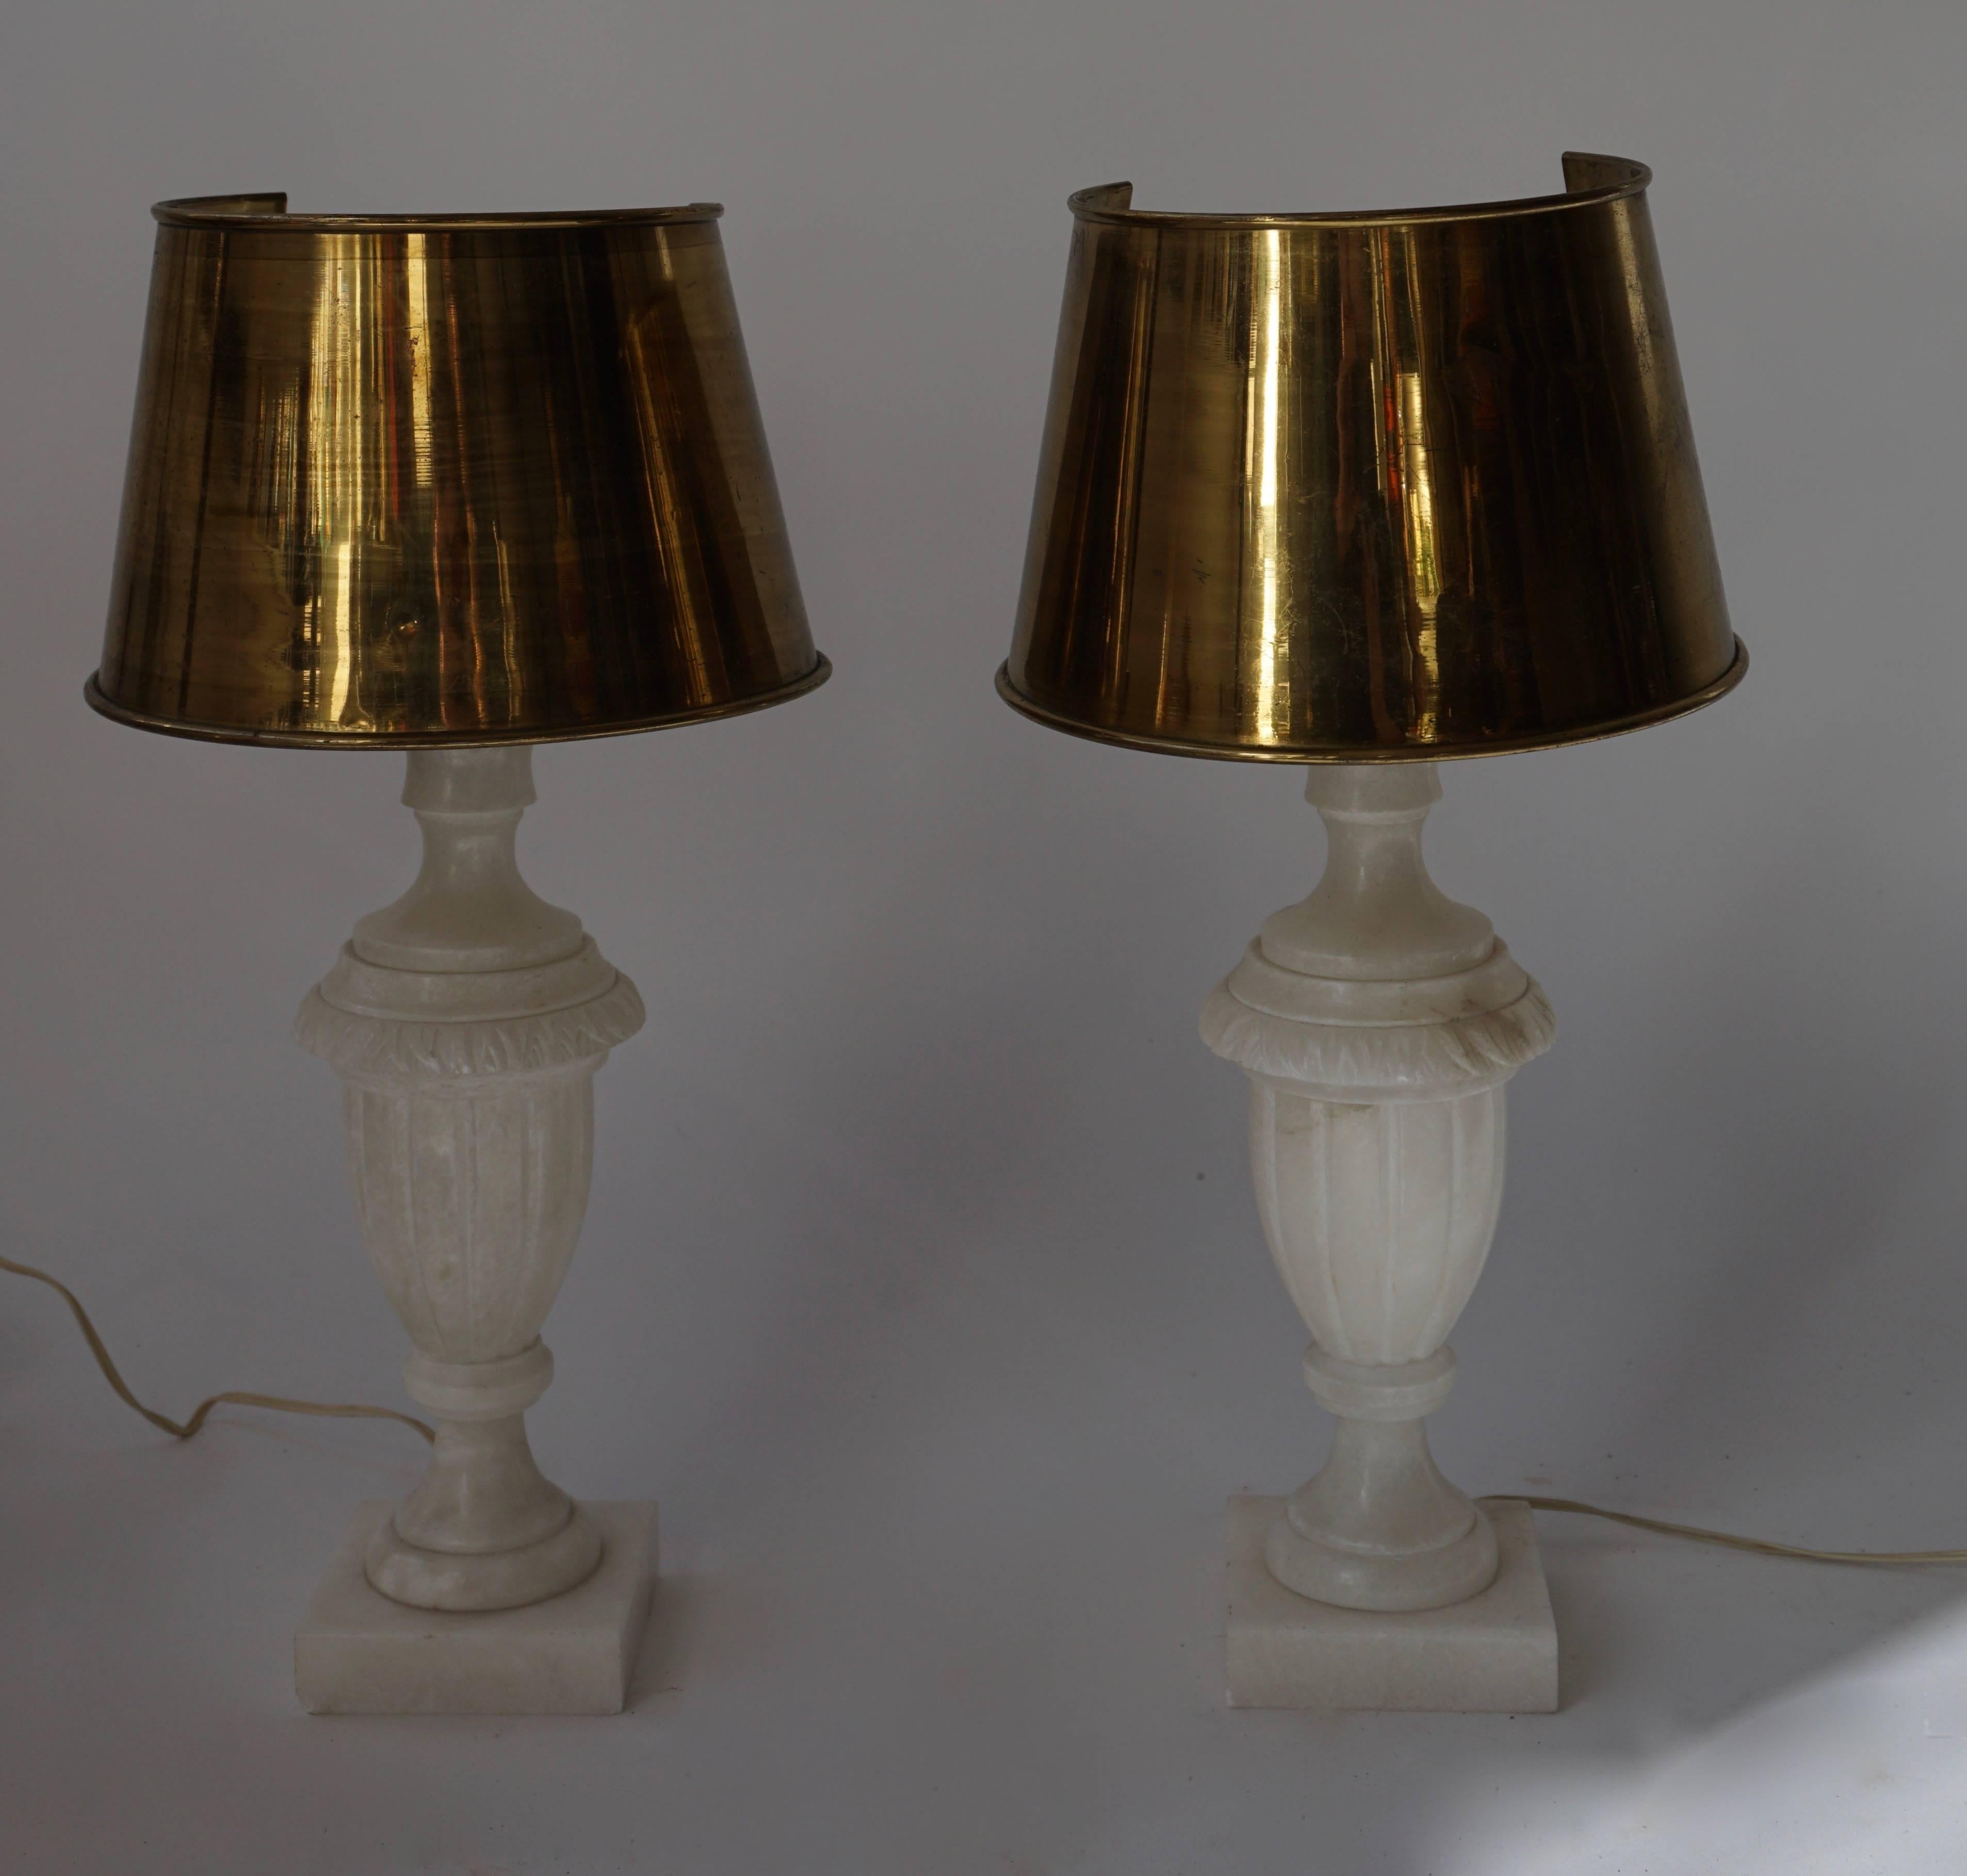 Two alabaster with copper shades table lamps.
Measures: Diameter 20 cm.
Height 52 cm.